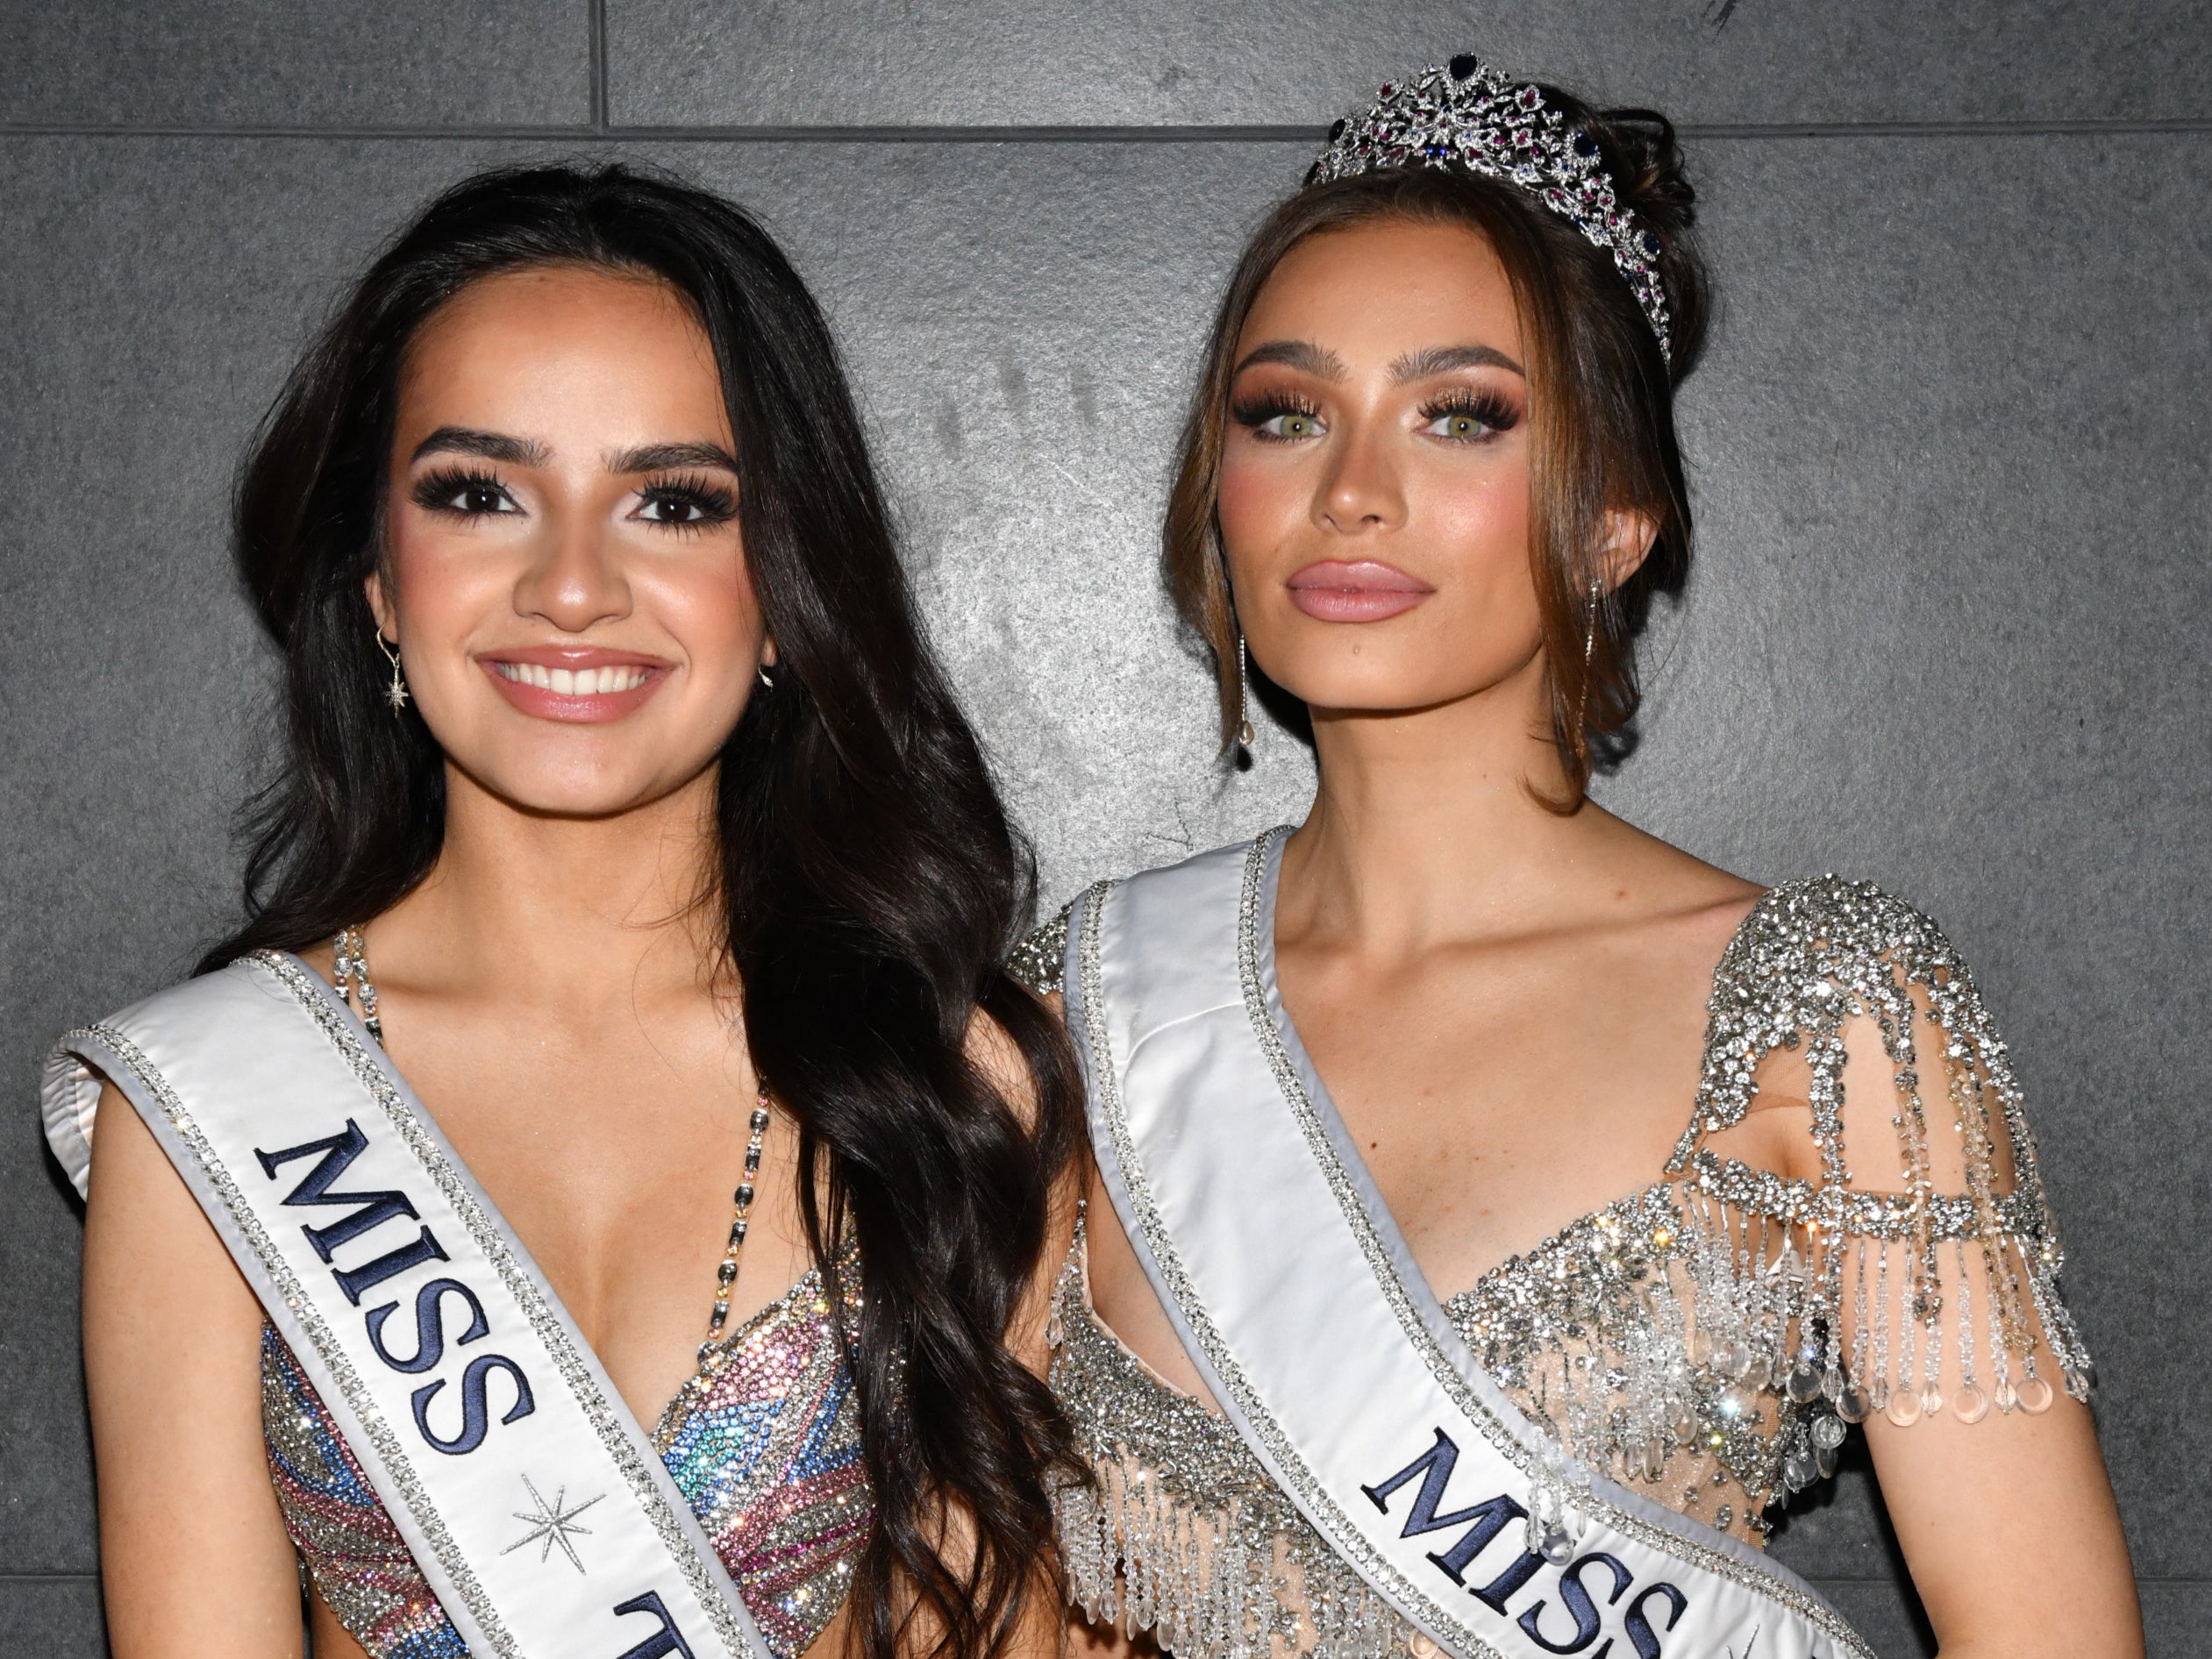 Miss Teen USA 2023, UmaSofia Srivastava, left, and Miss USA 2023, Noelia Voigt, right, have both resigned their crowns recently, amid allegations of a toxic work environment against the organization